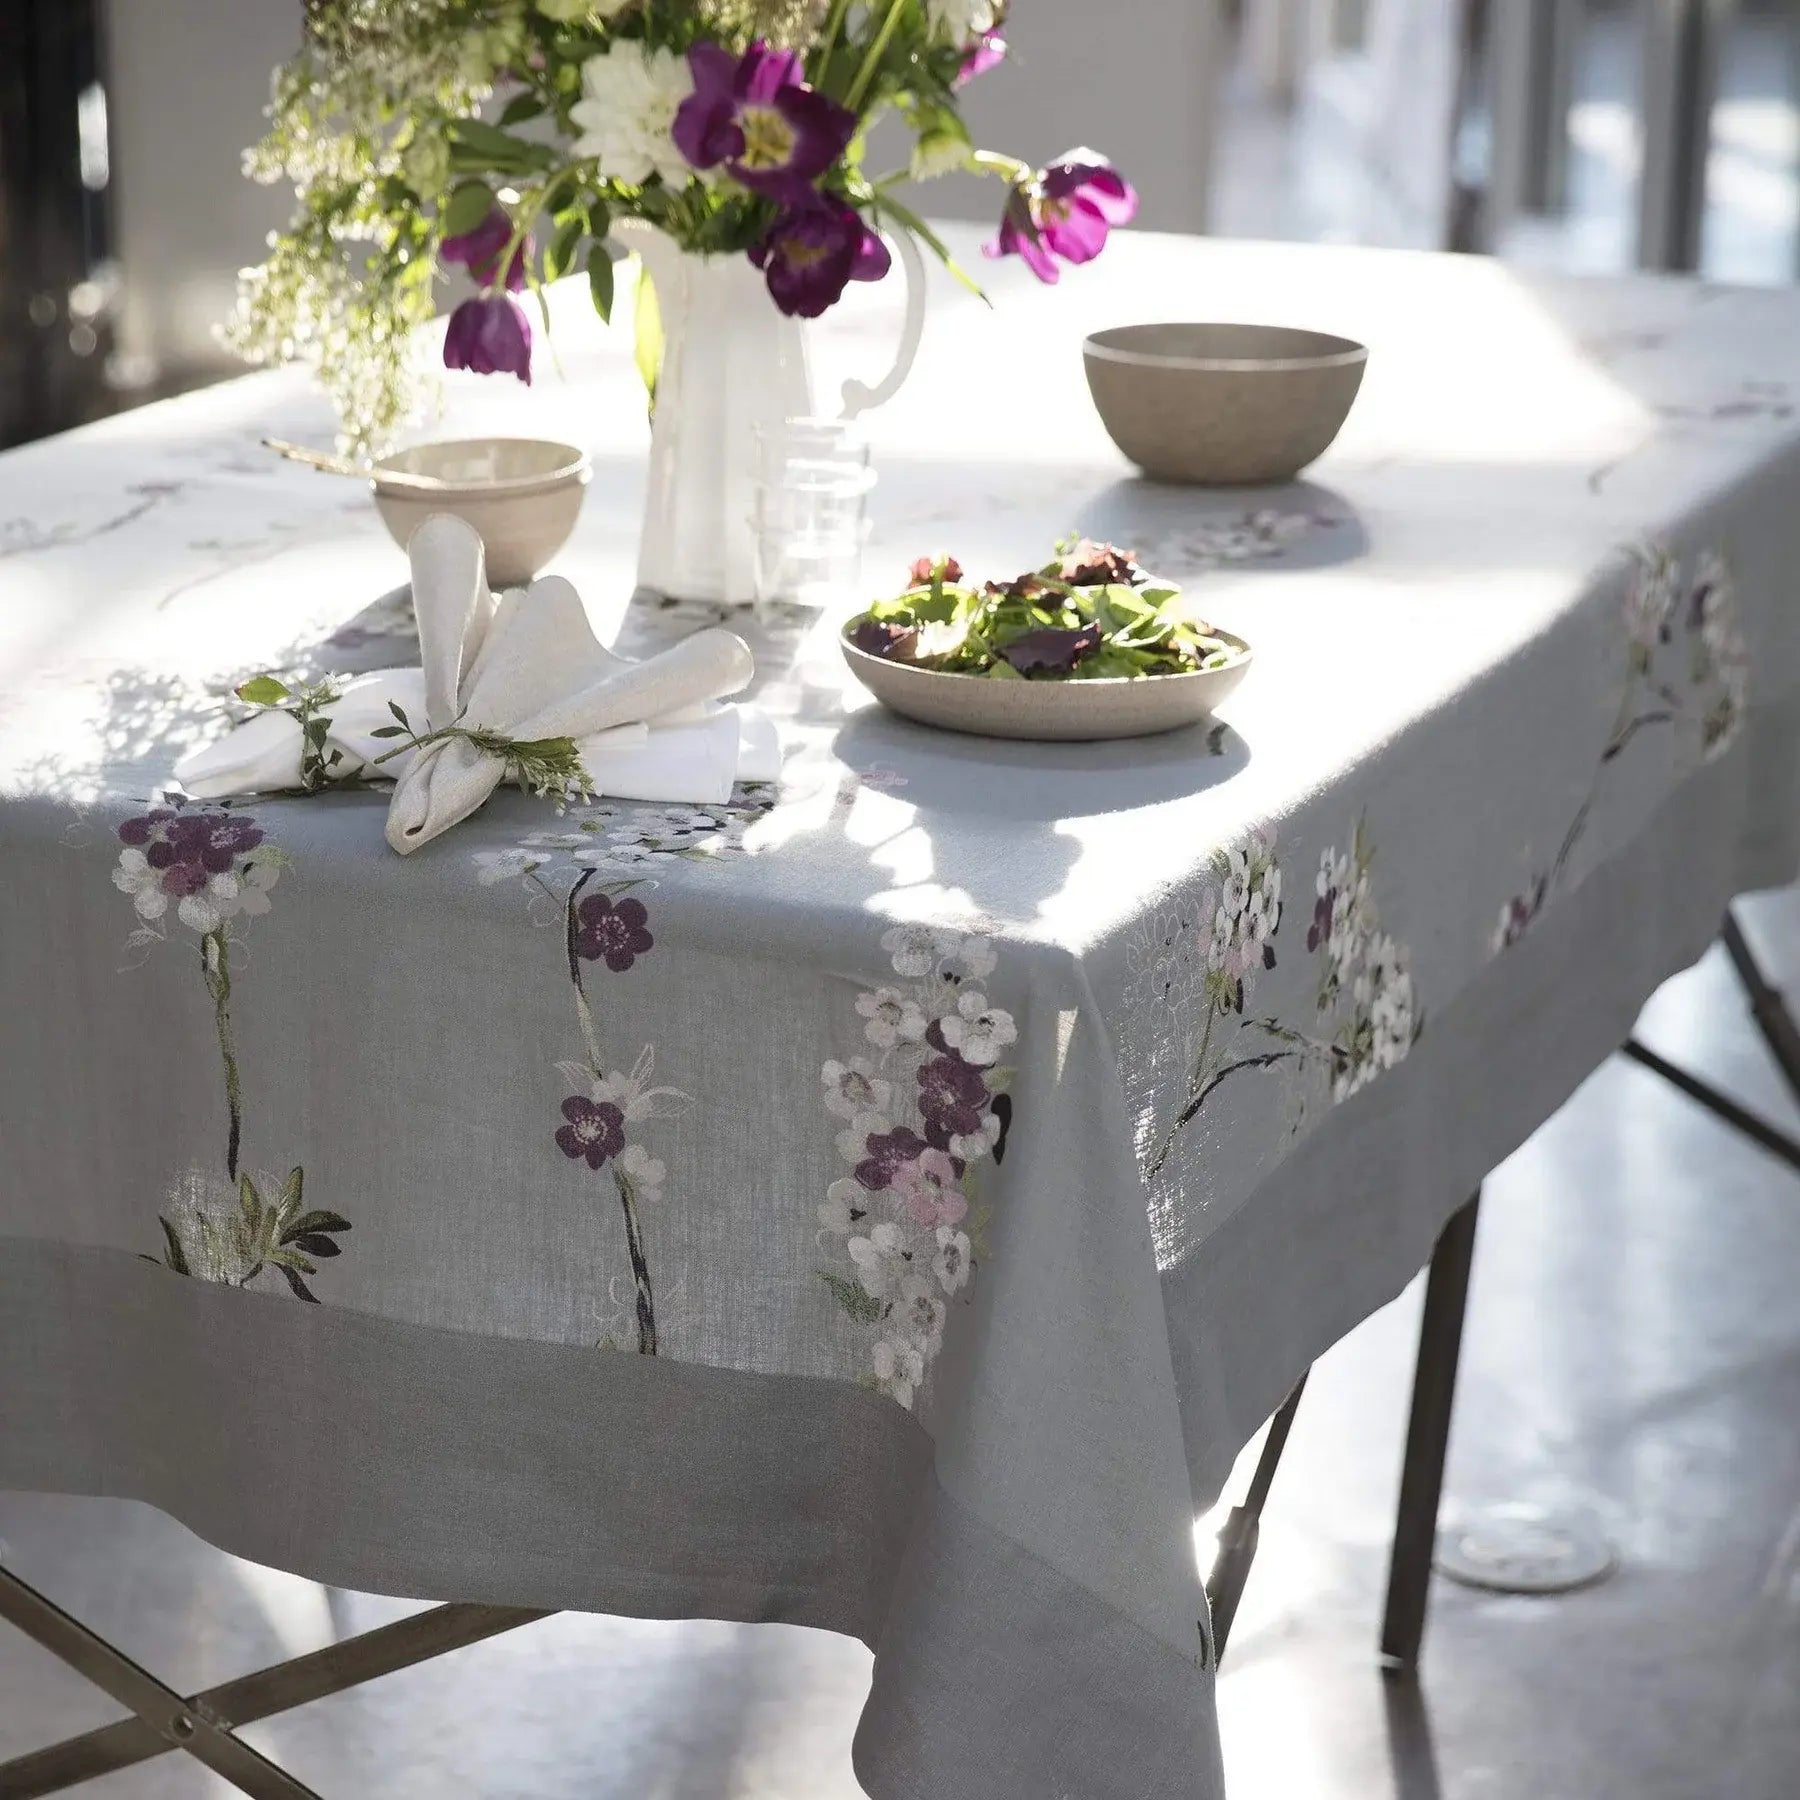 Mode Living Positano Tablecloth on a table with a dinner napkin and salad